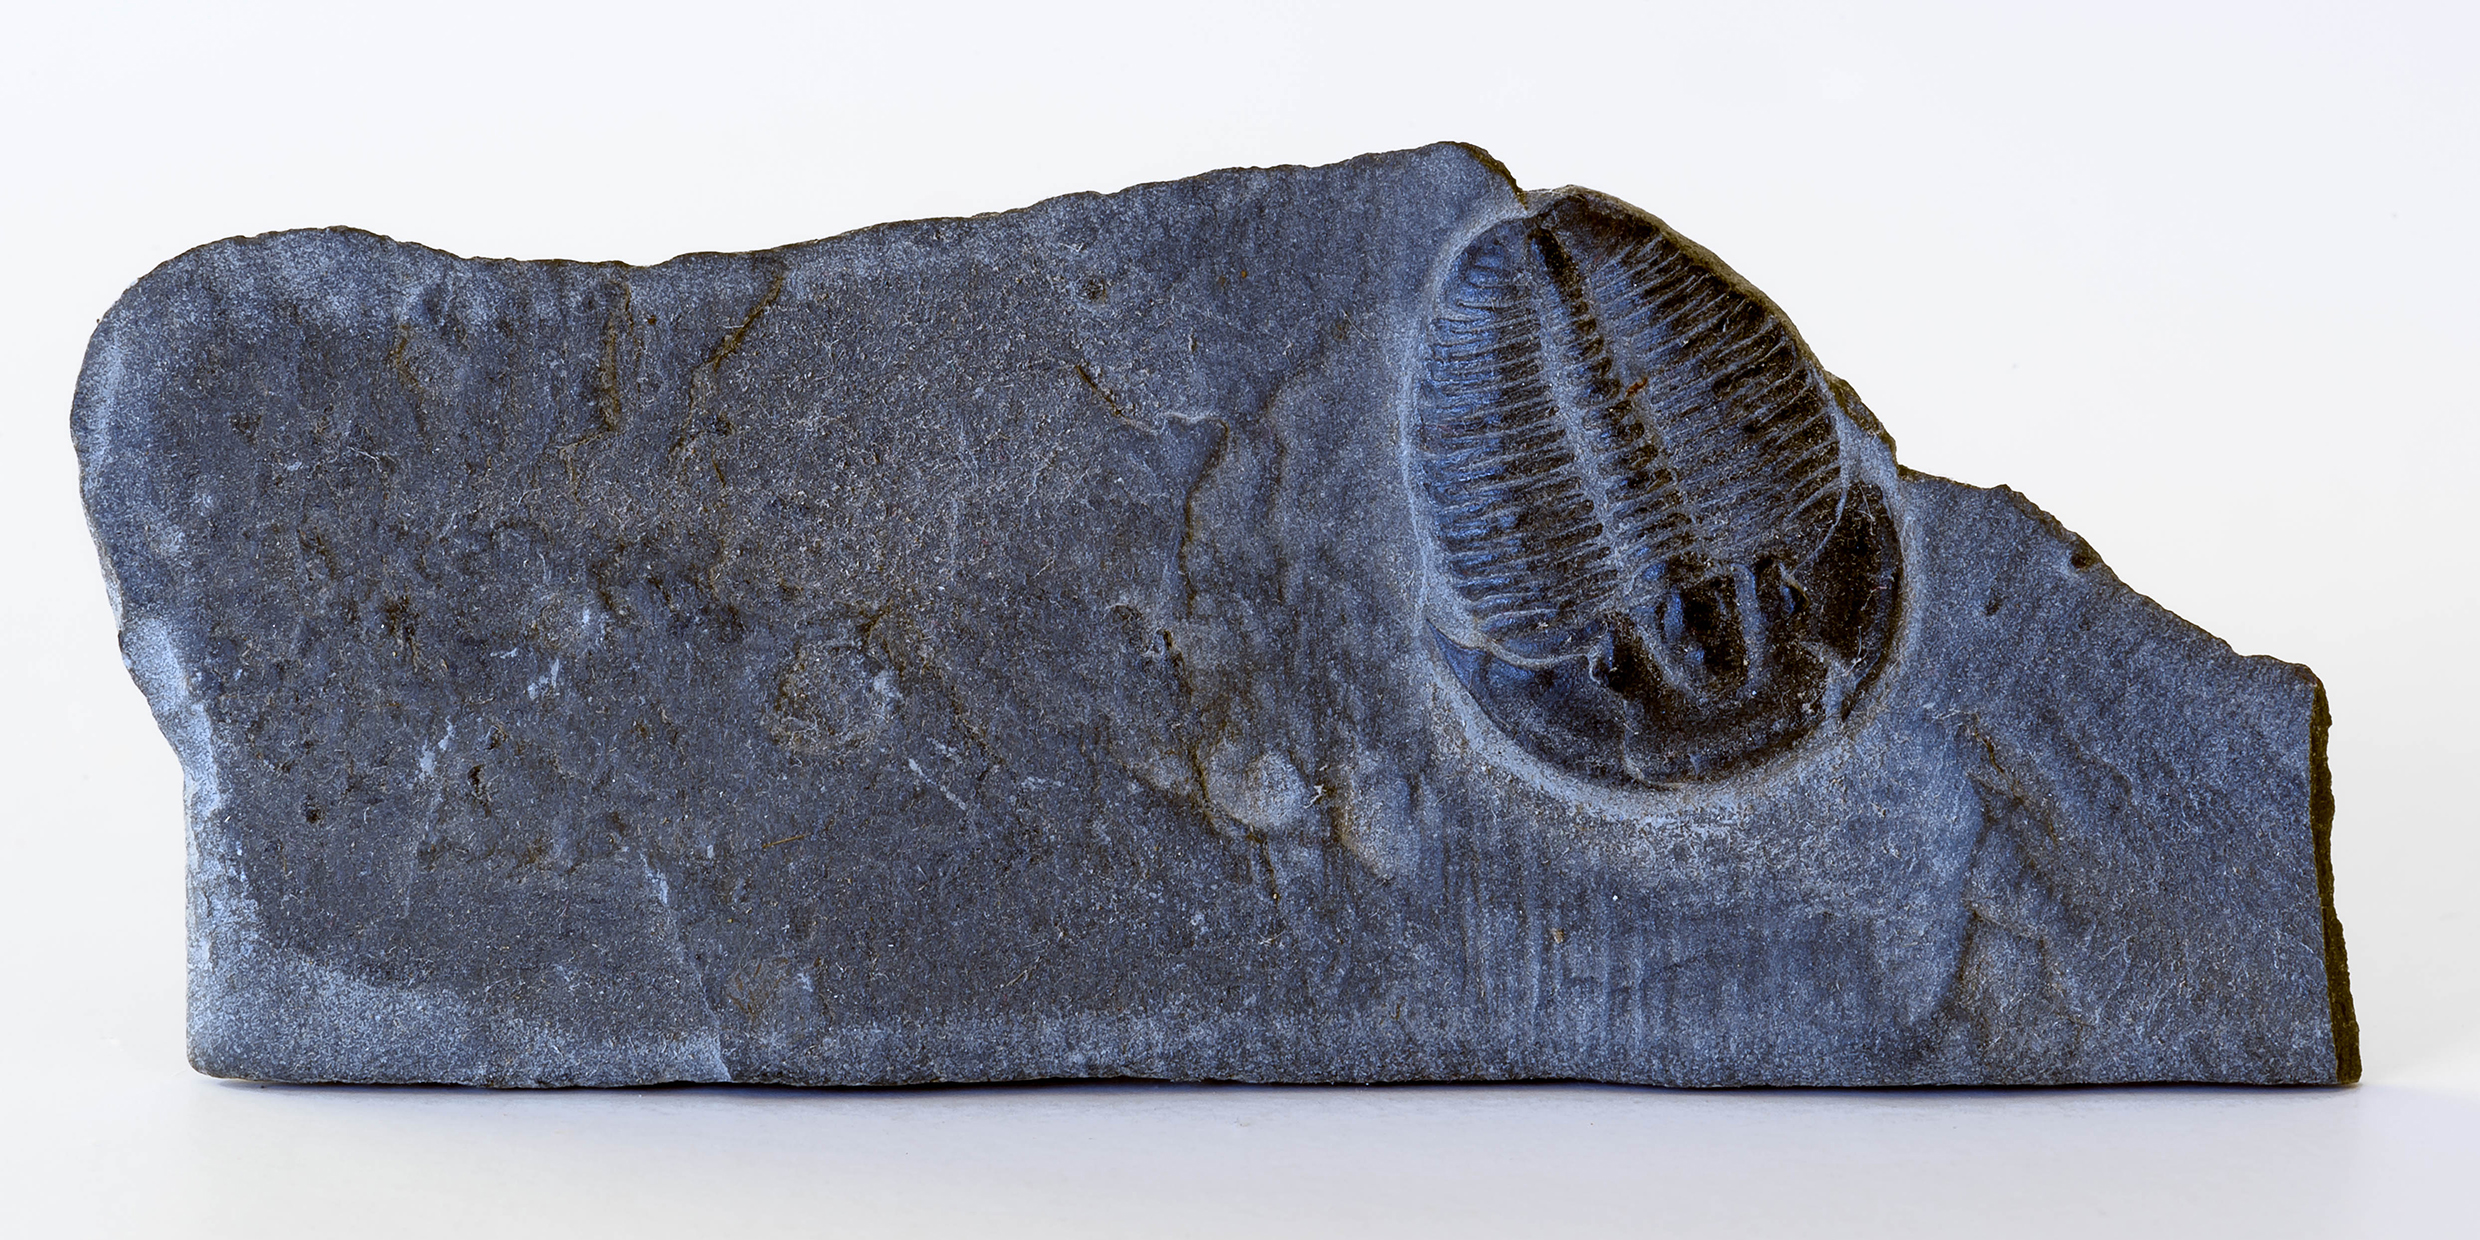 Image of a fossil trilobite encased in a stone